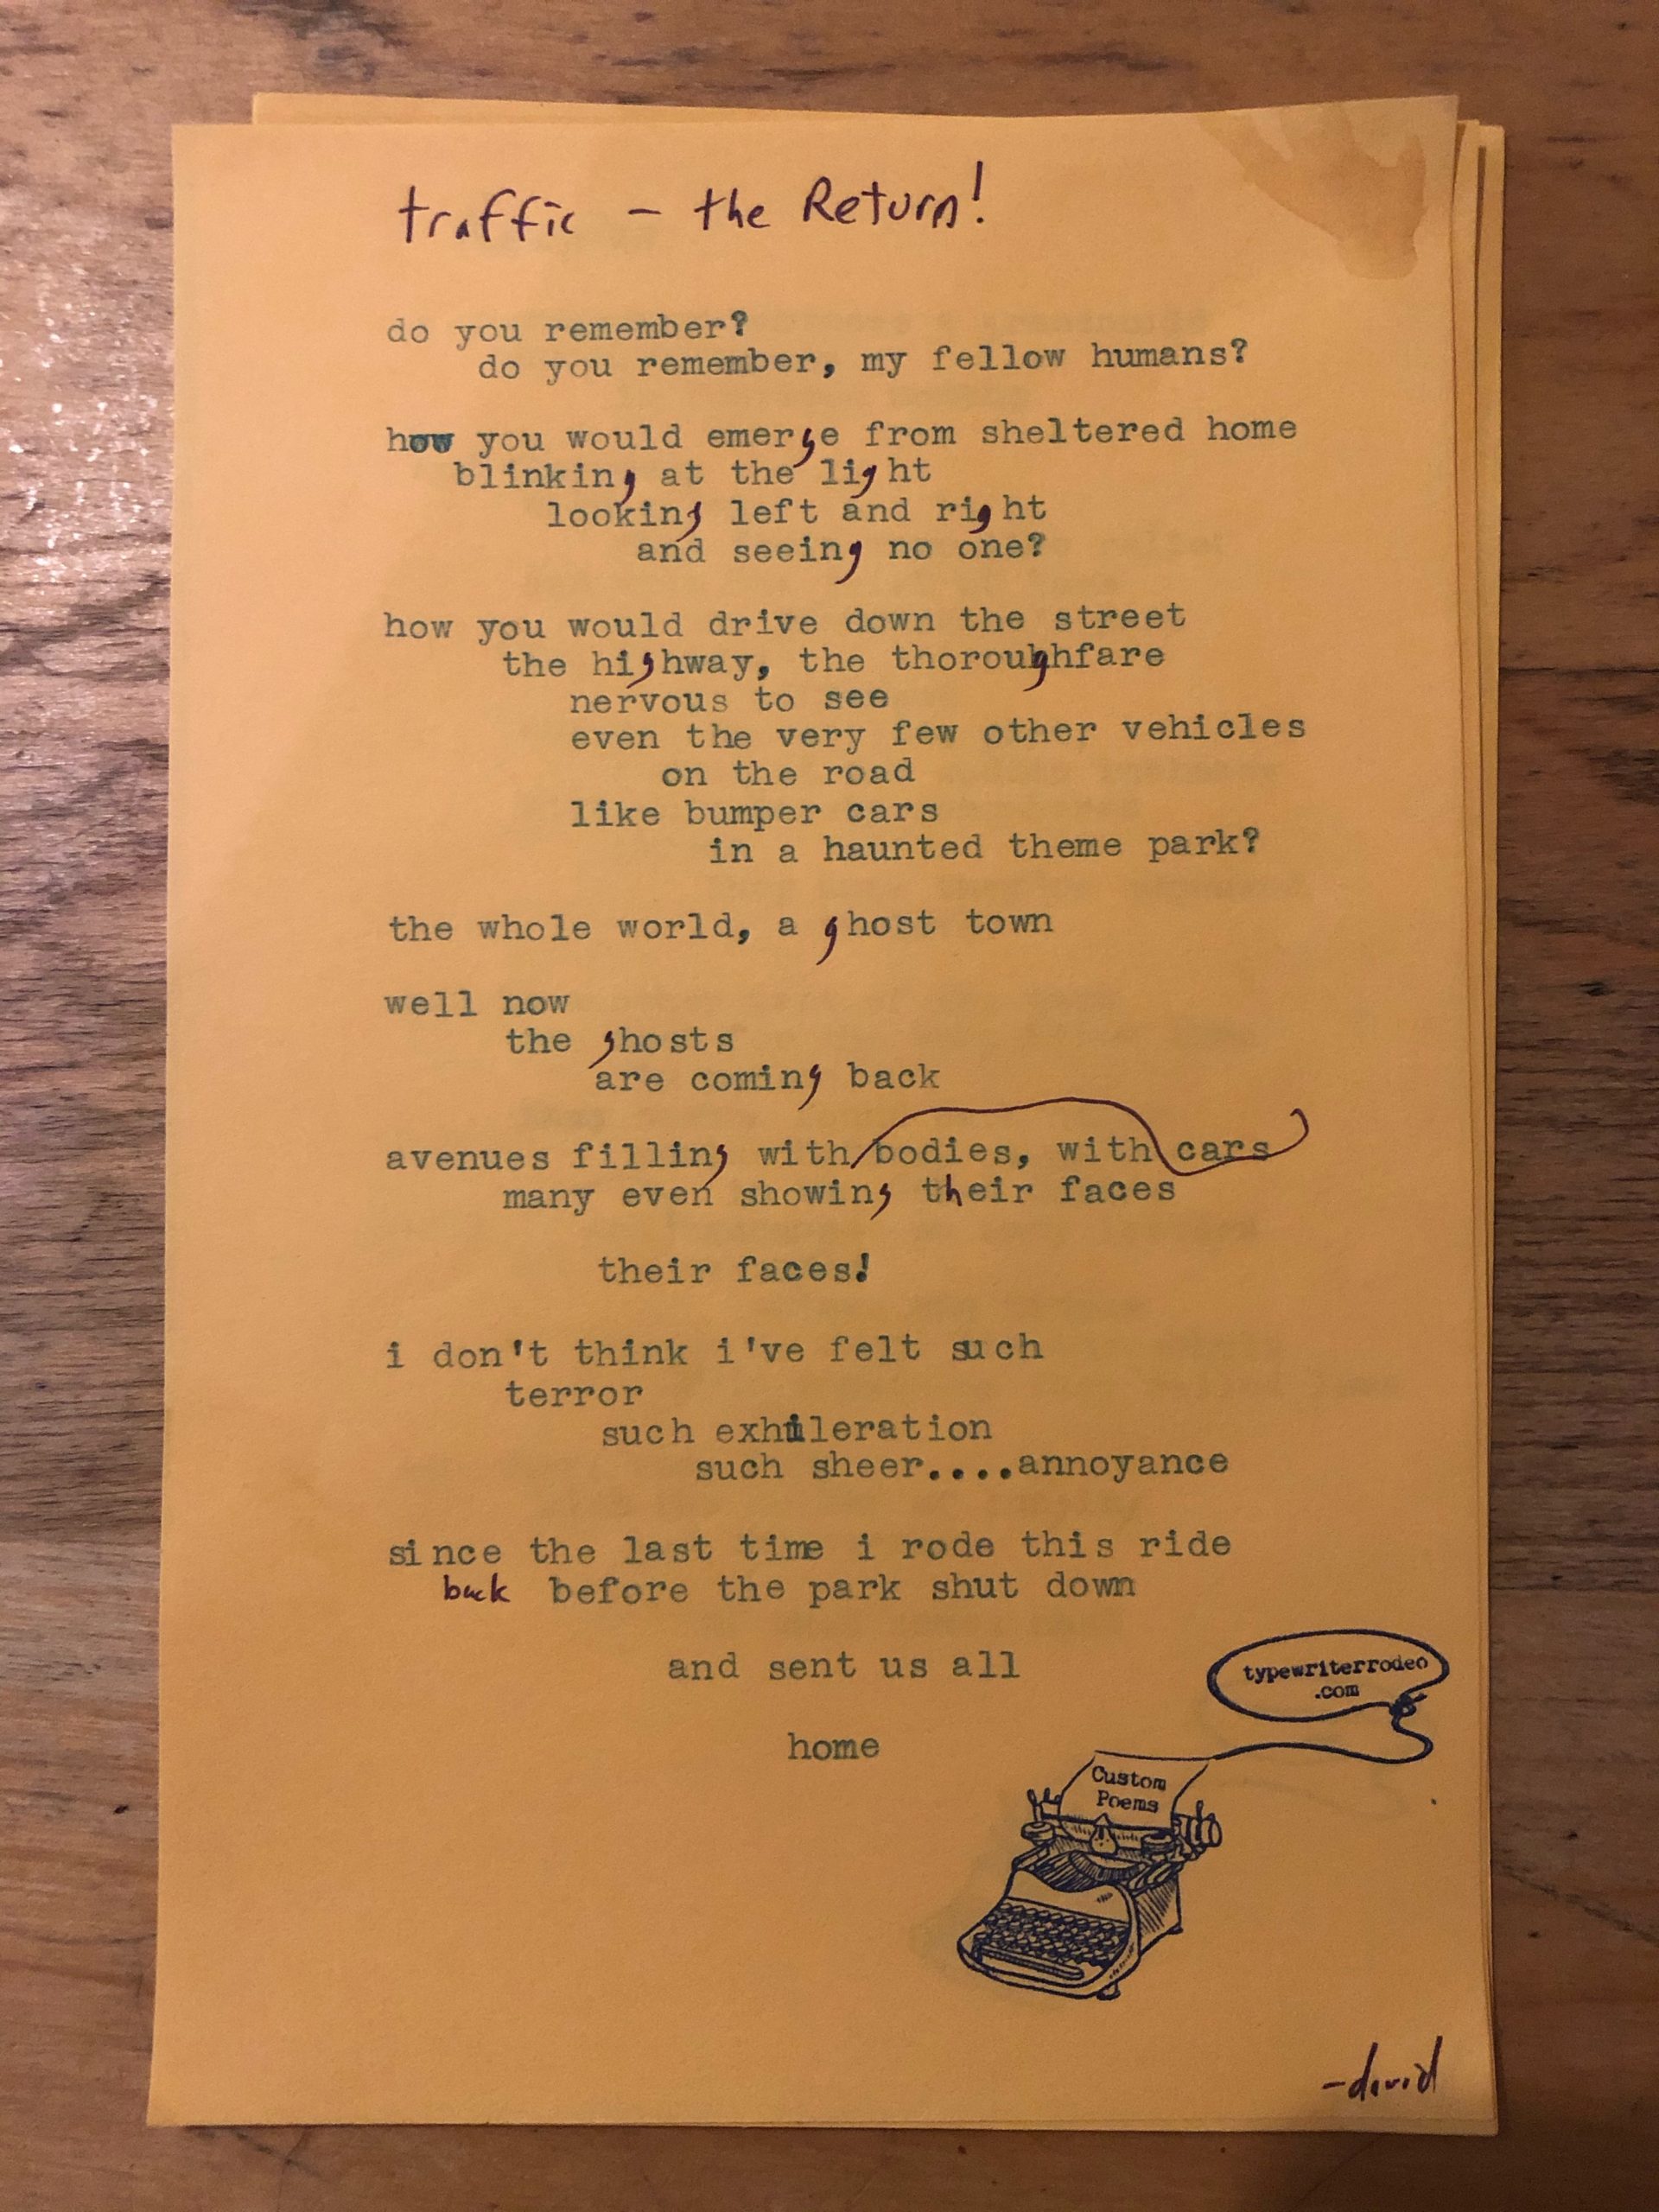 photo of typewritten poem on a small, yellow sheet of paper